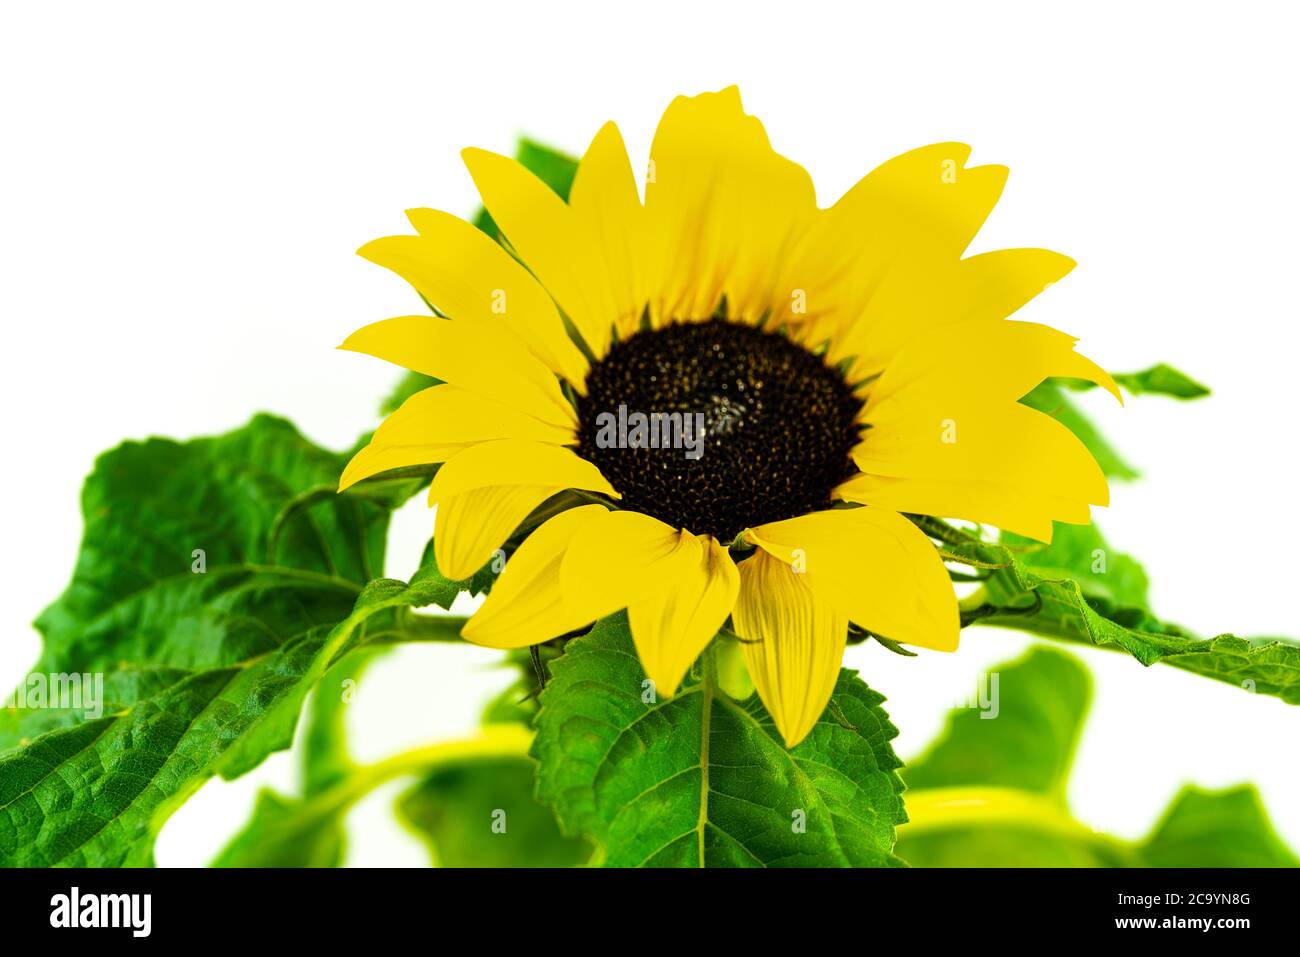 close-up shot of sunflower petals with shallow depth of field against white background Stock Photo